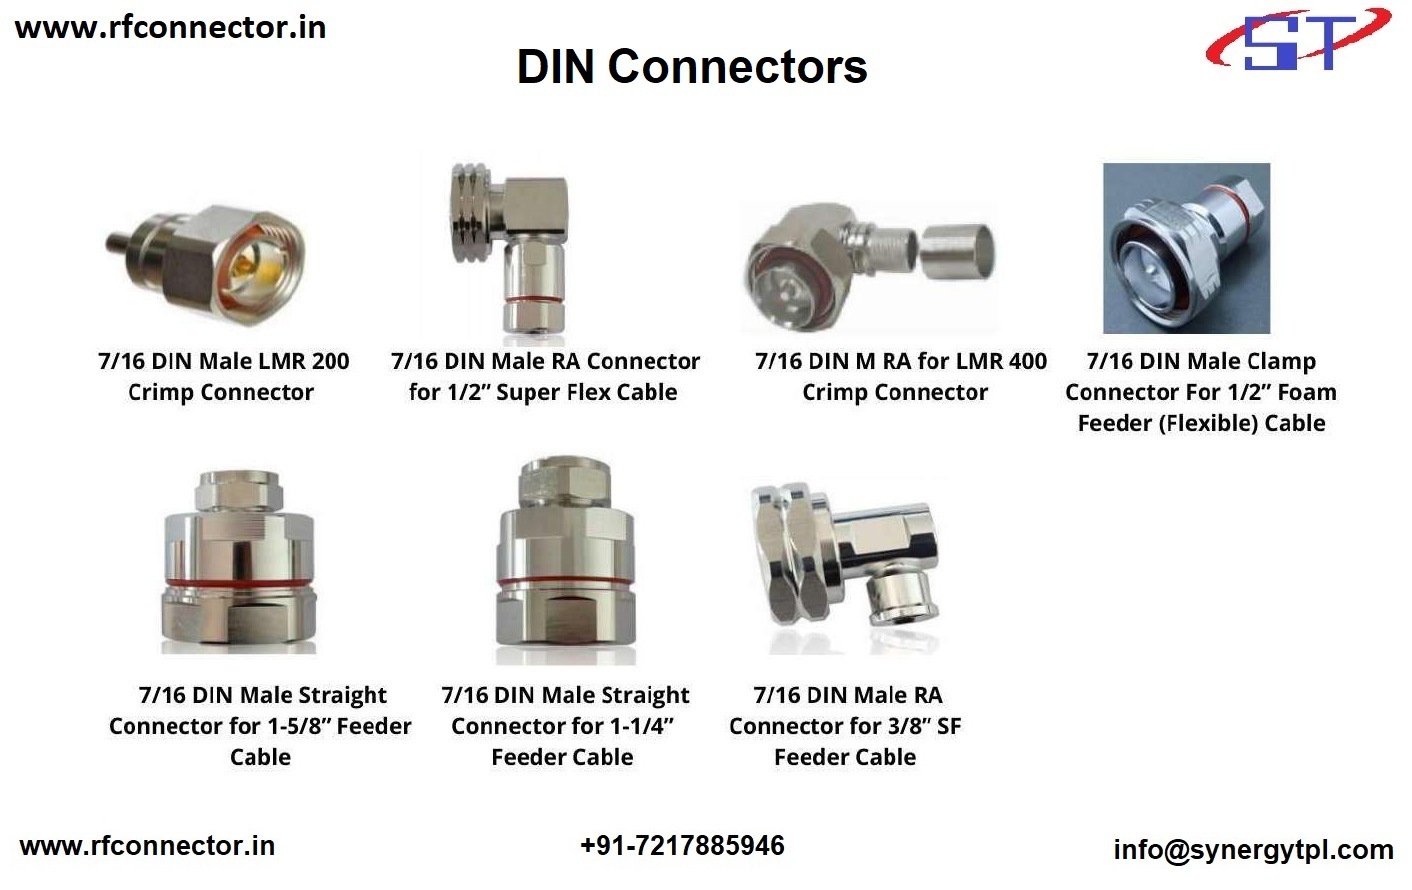 DIN male crimp connector for LMR 400 cable